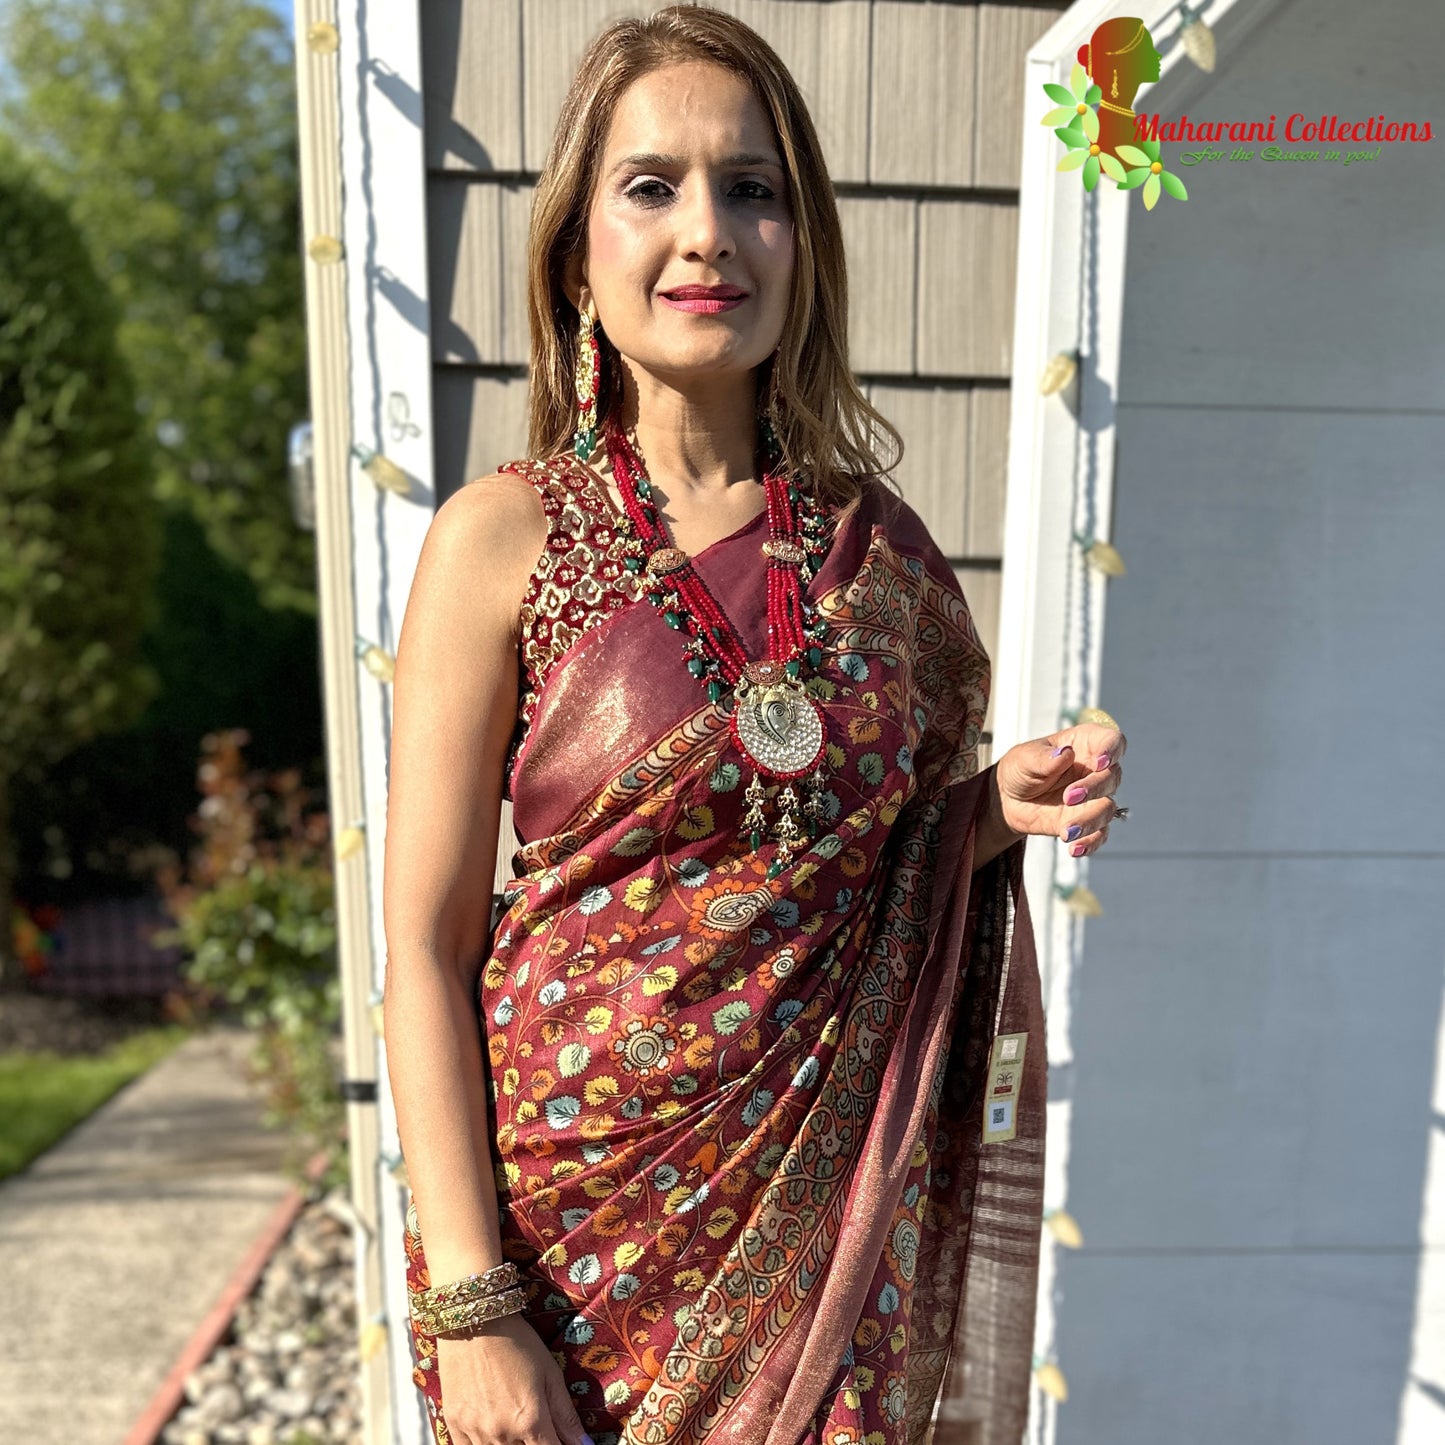 Maharani's Simple Elegance Matka Silk Saree - Maroon Floral (with stitched blouse and petticoat)